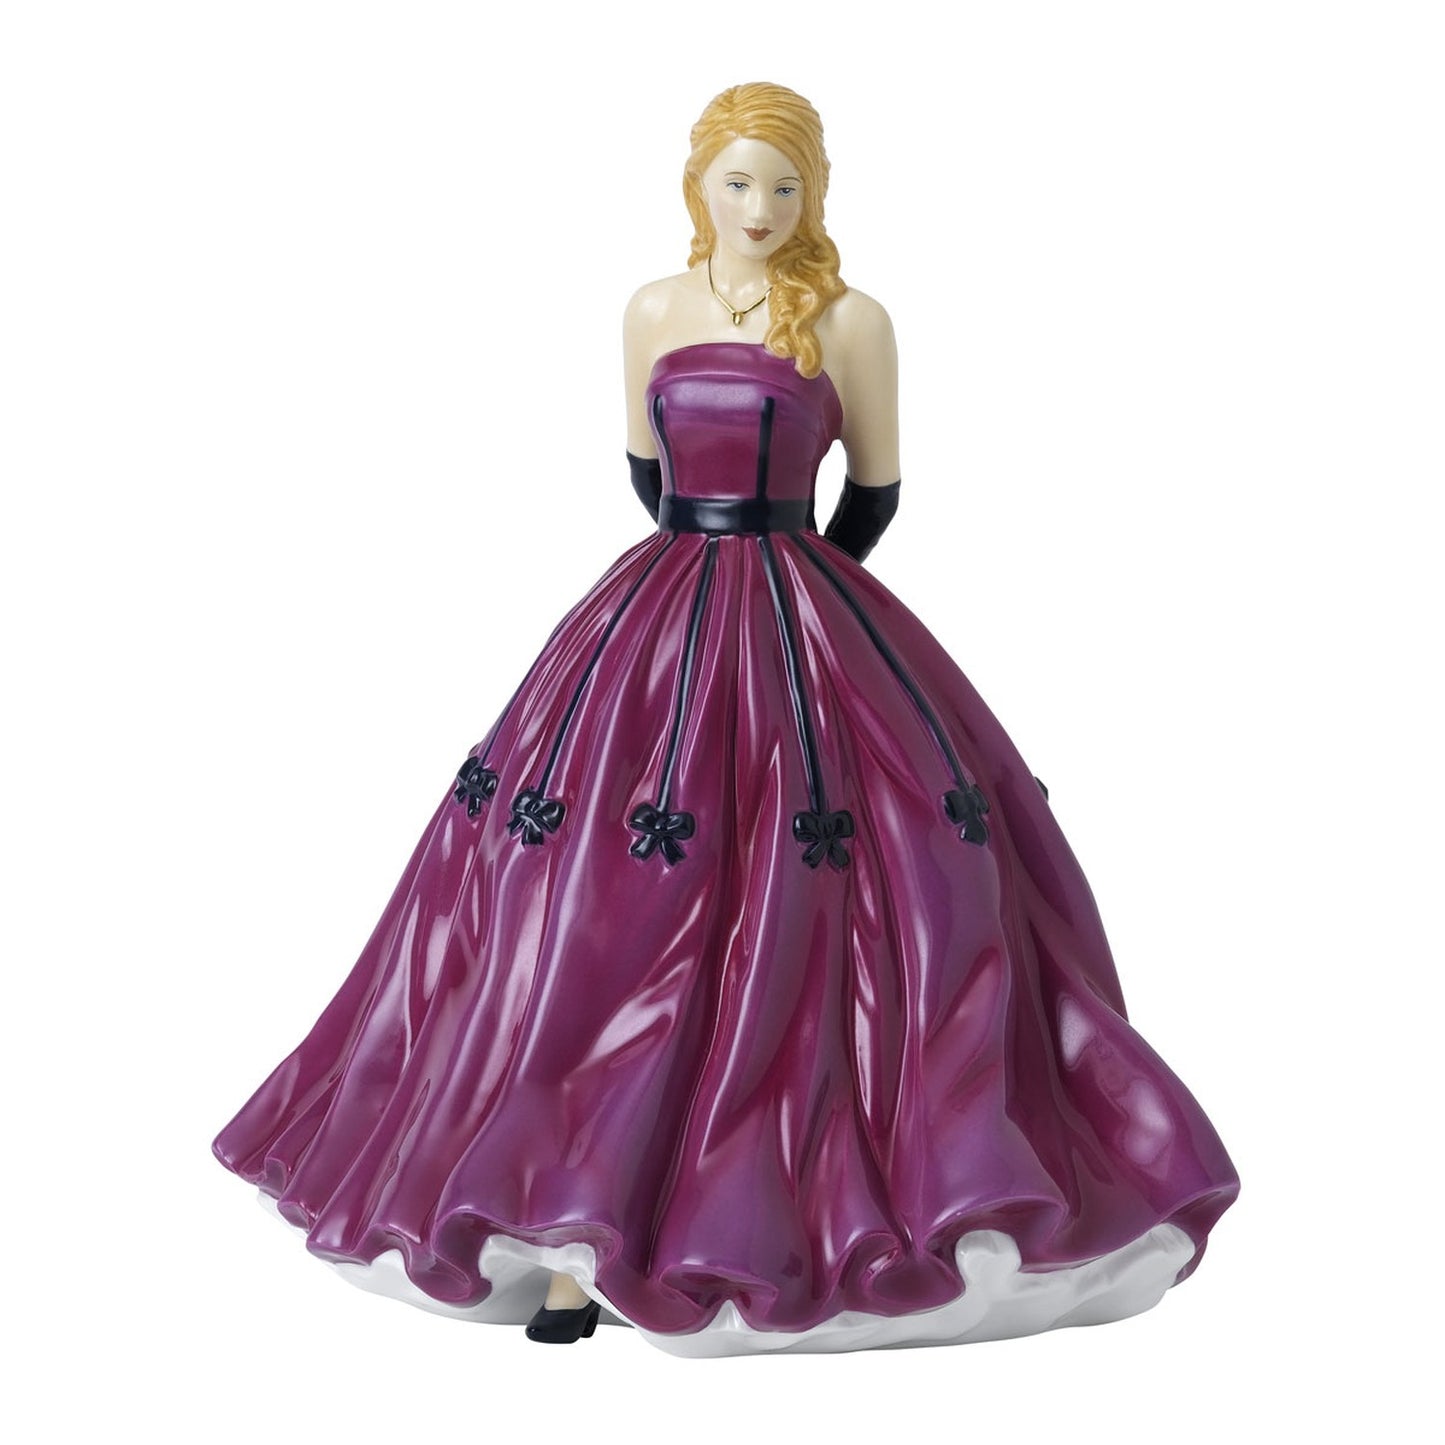 Royal Doulton Happy Birthday, Figure Of The Year 2021 8.7"